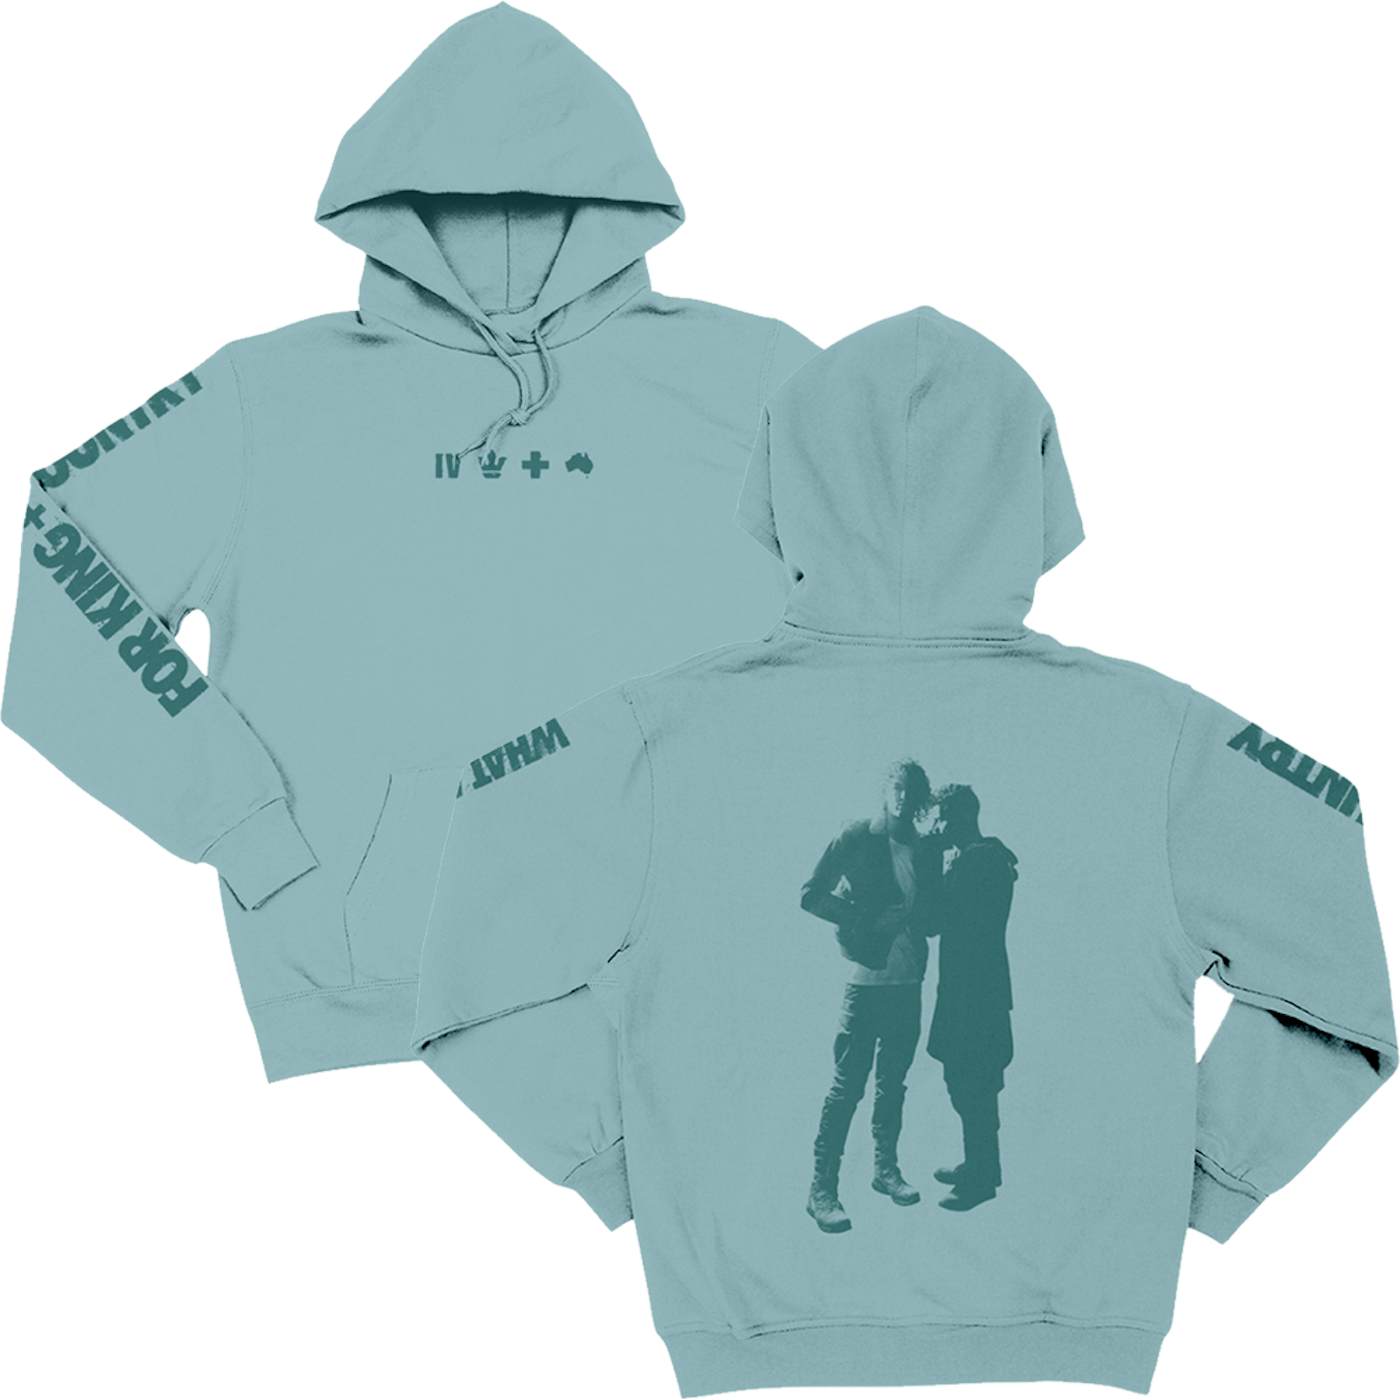 for KING & COUNTRY Collector's Sweatshirt - Blue